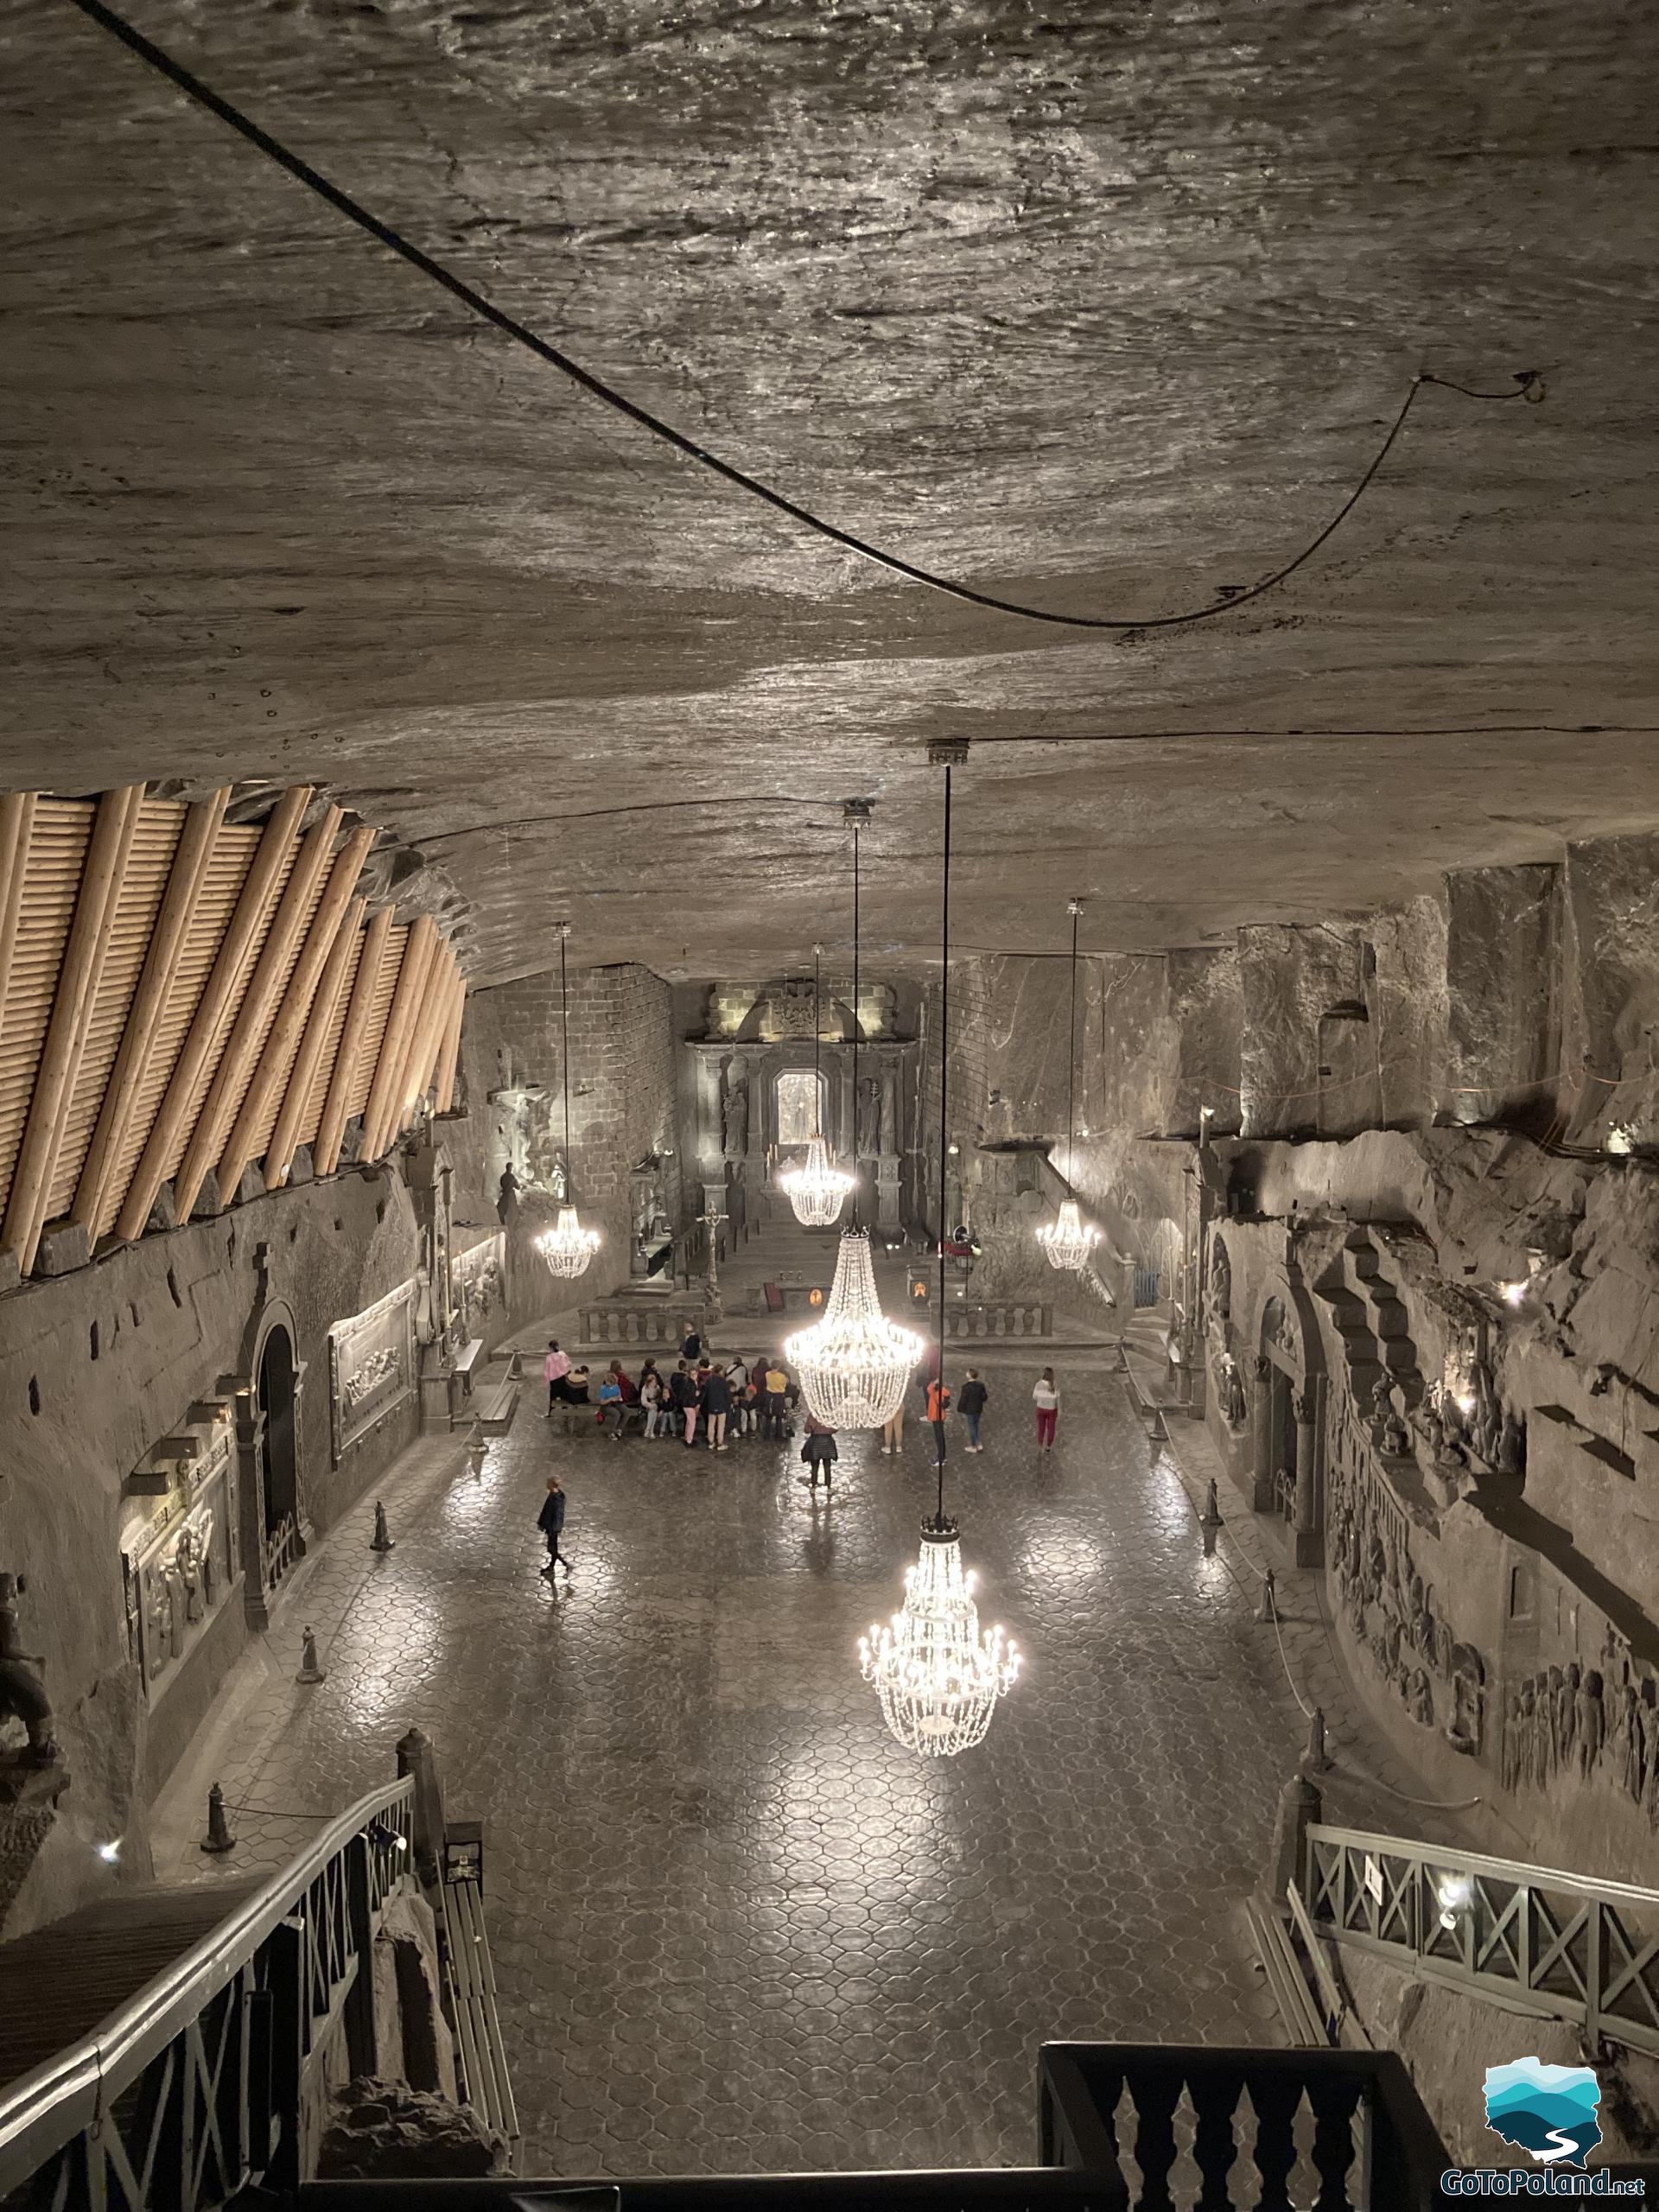 the most representative salt chamber “Chapel of St. Kinga”, there are five salt chandeliers, many religious scenes are carved on the walls